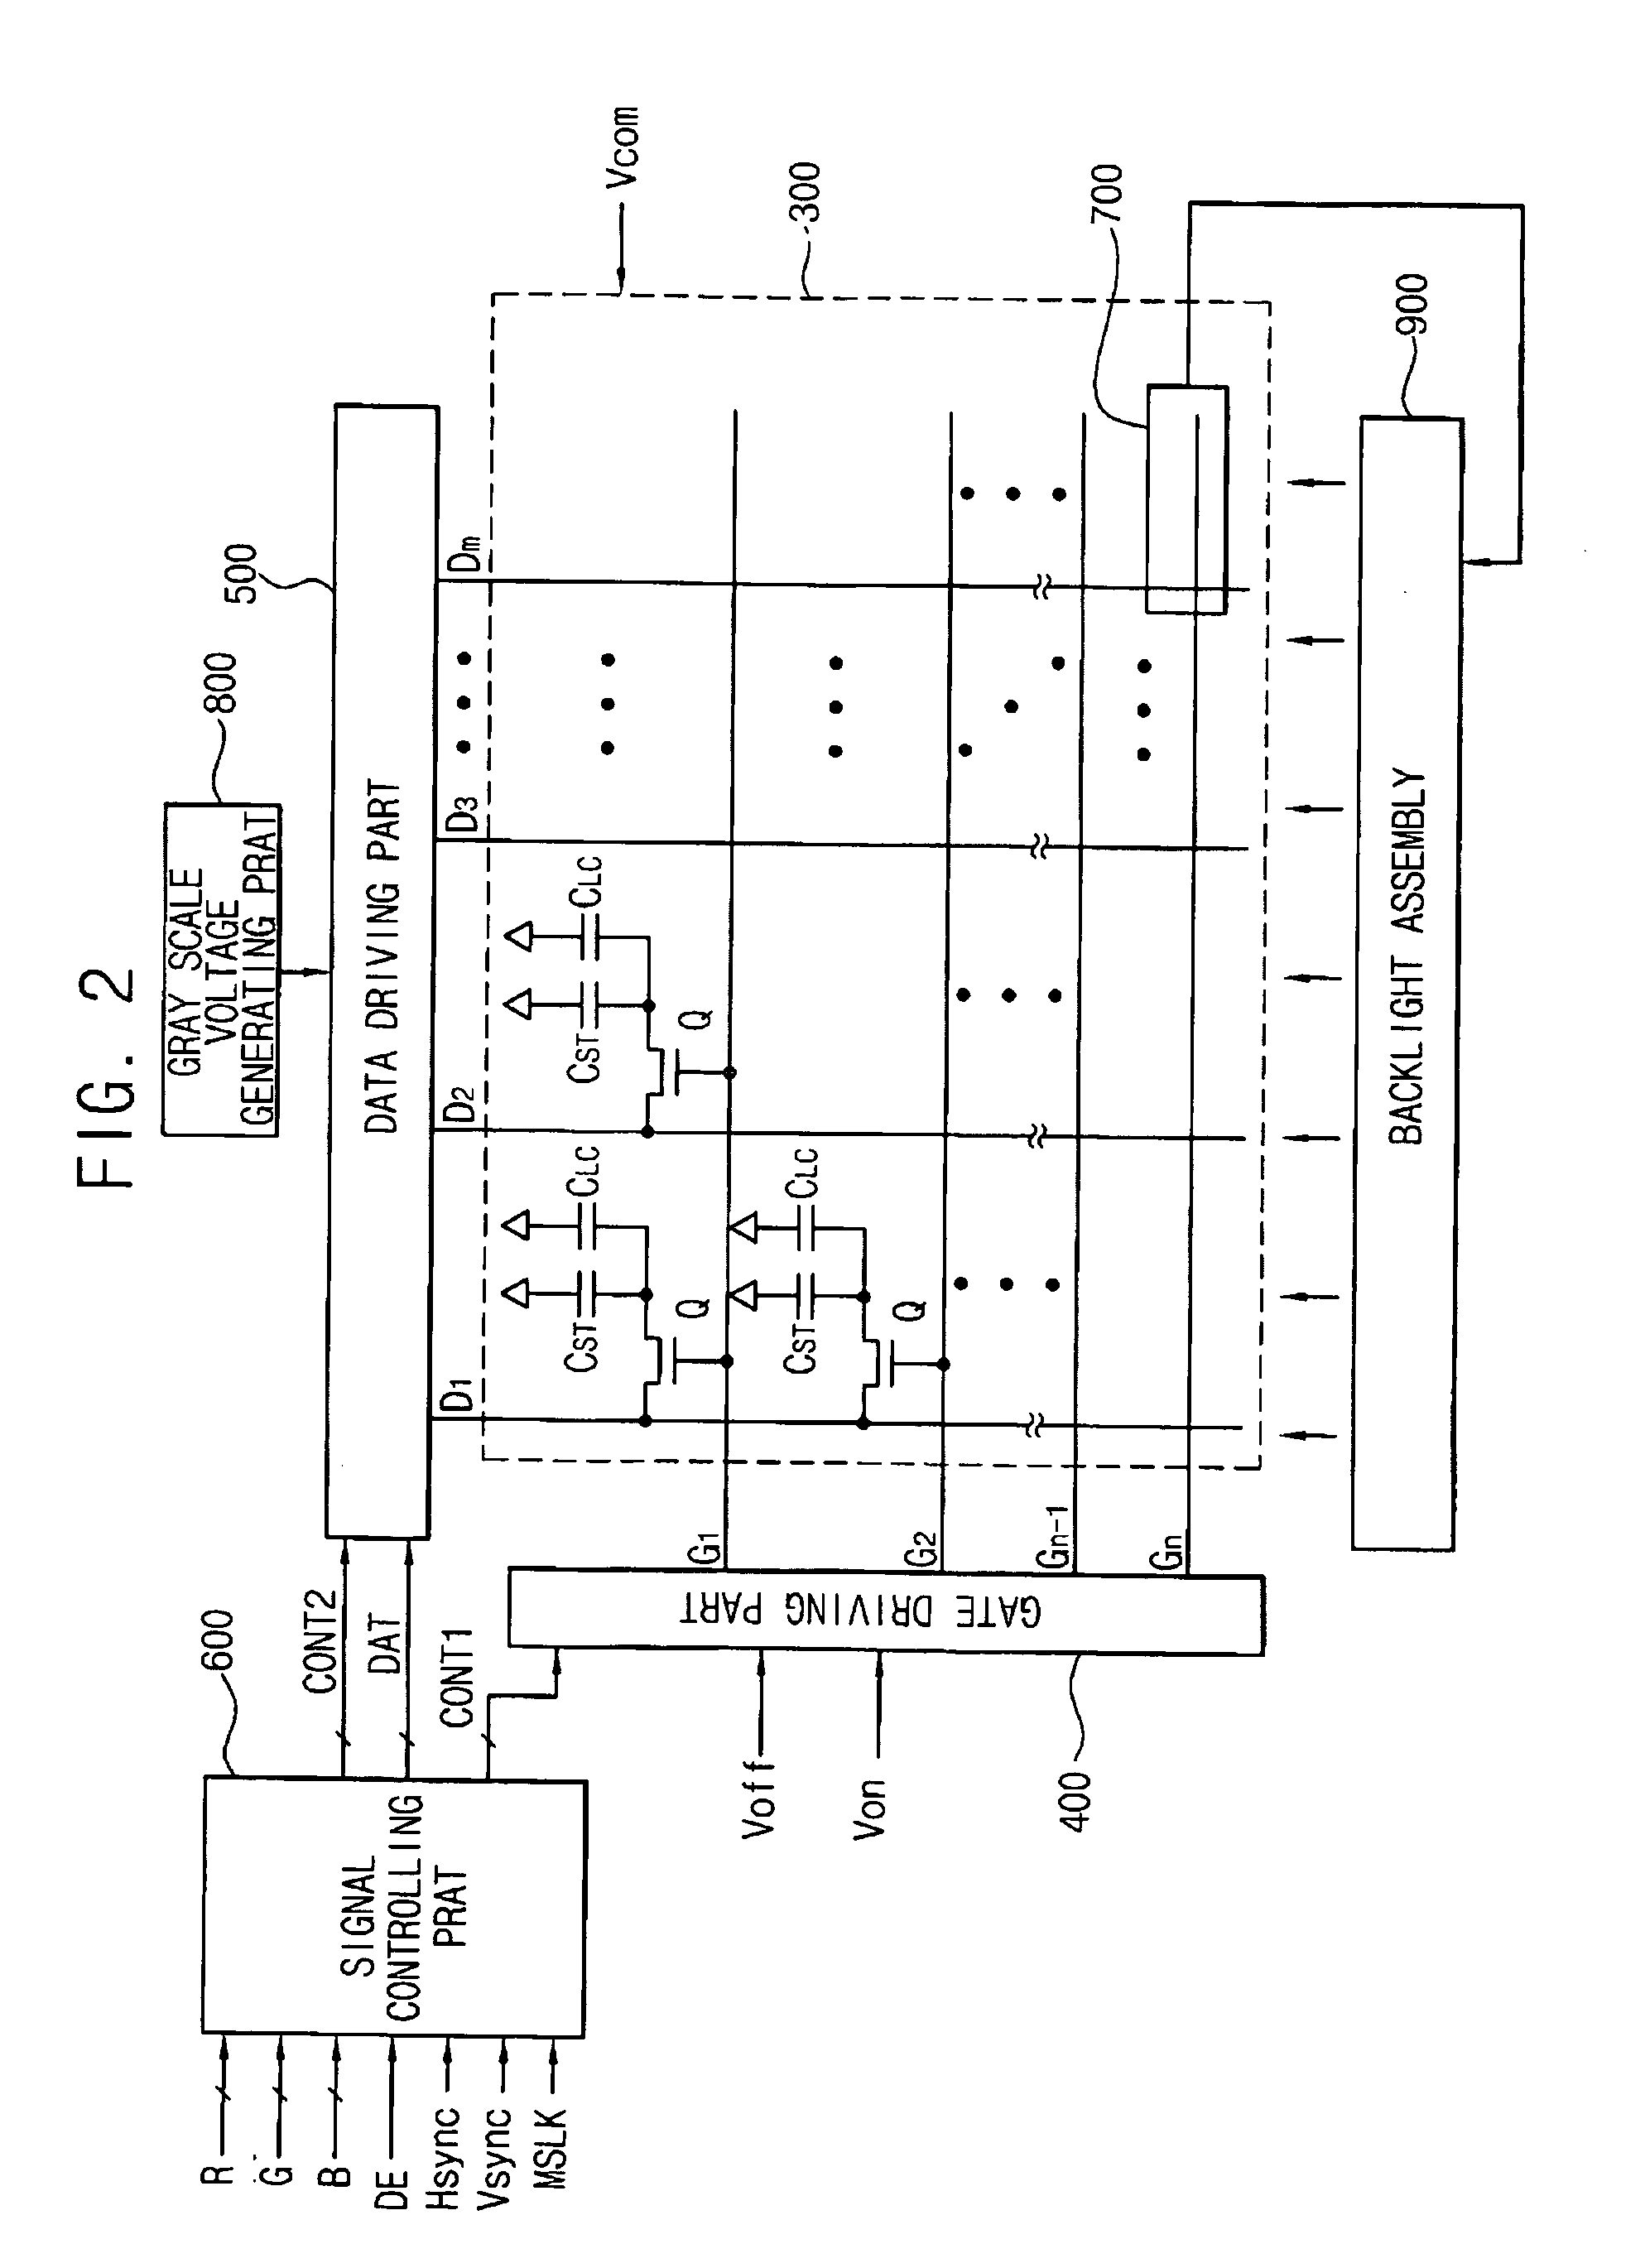 Liquid crystal display apparatus, light-sensing element and apparatus for controlling luminance of a light source